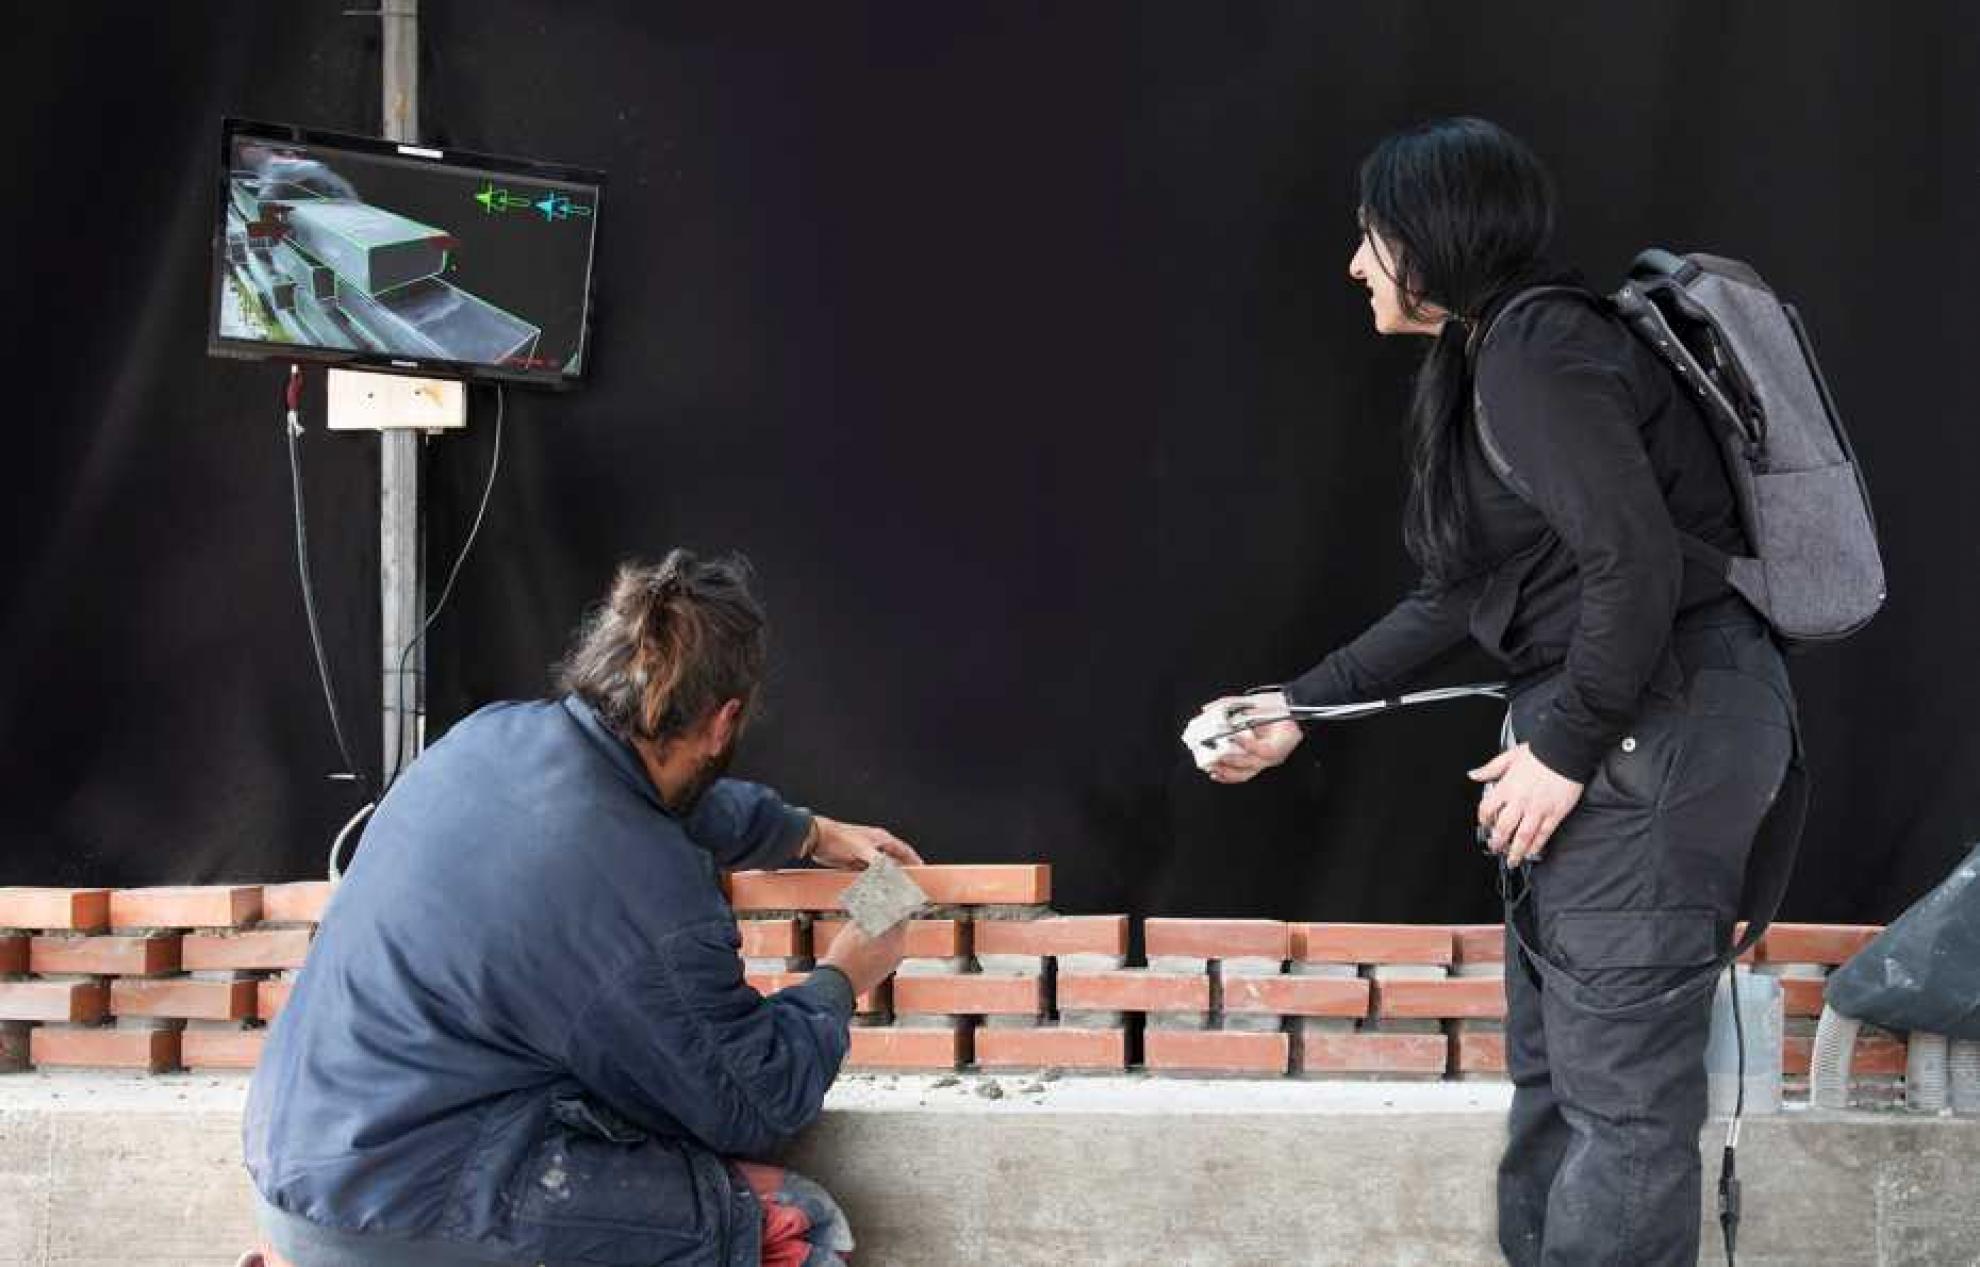 The software compares the position of the bricks with the virtual design (credits: ETH Zurich / Michael Lyrenmann)